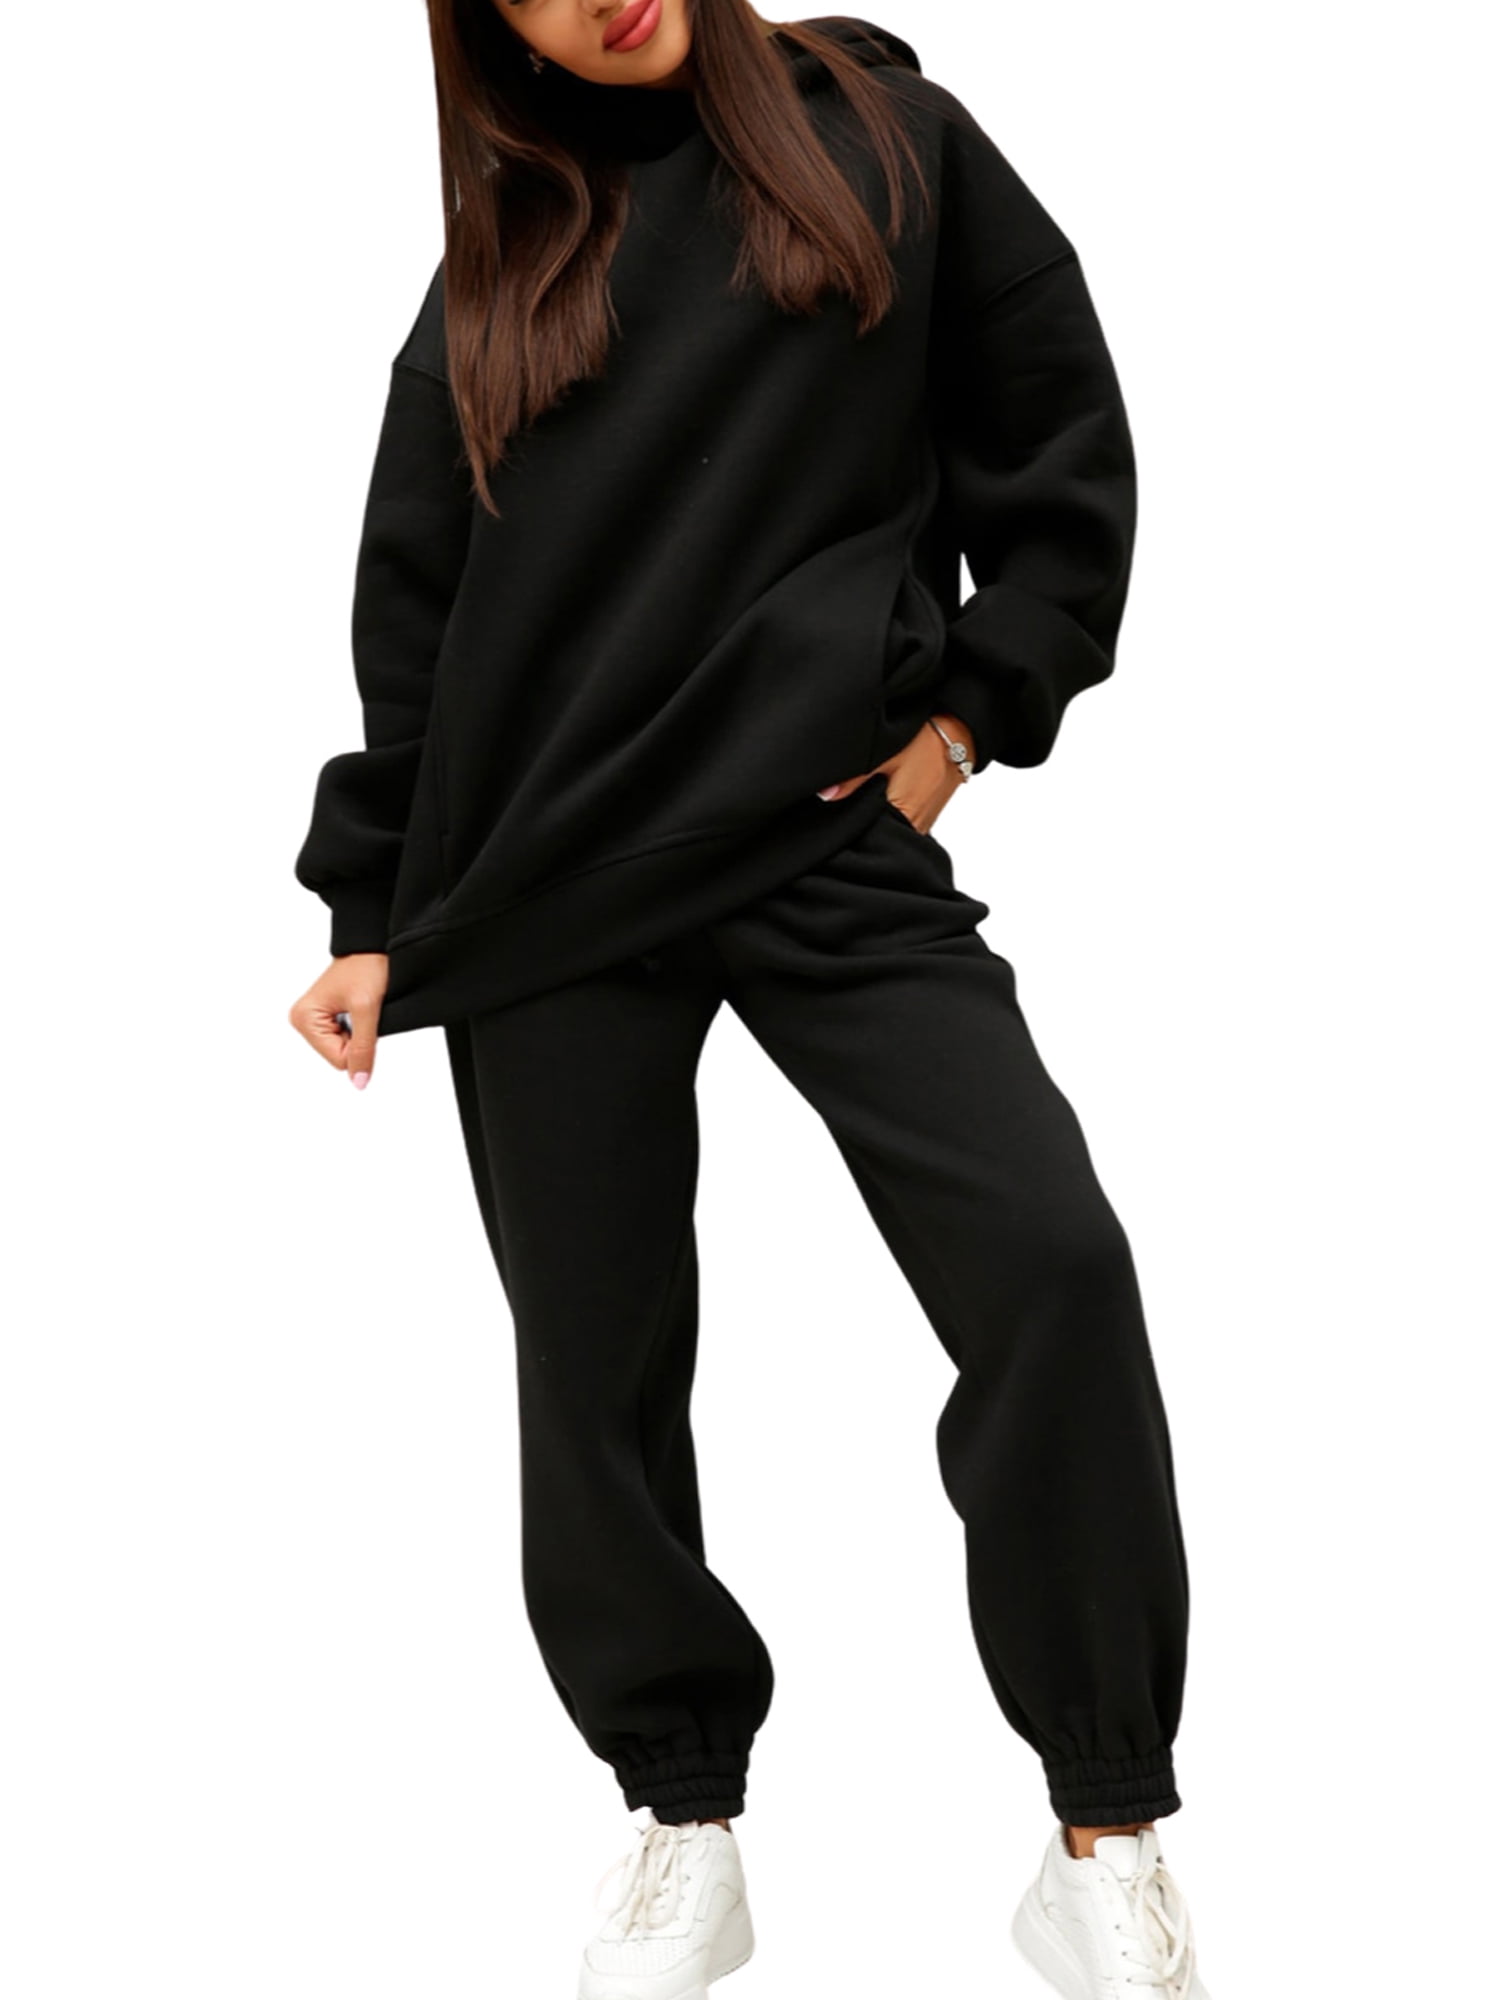 Women's Solid 2 Piece Long Sleeve Pockets Hoodie Pullover and Long Sweatpants Jogger Sweatsuit Tracksuit